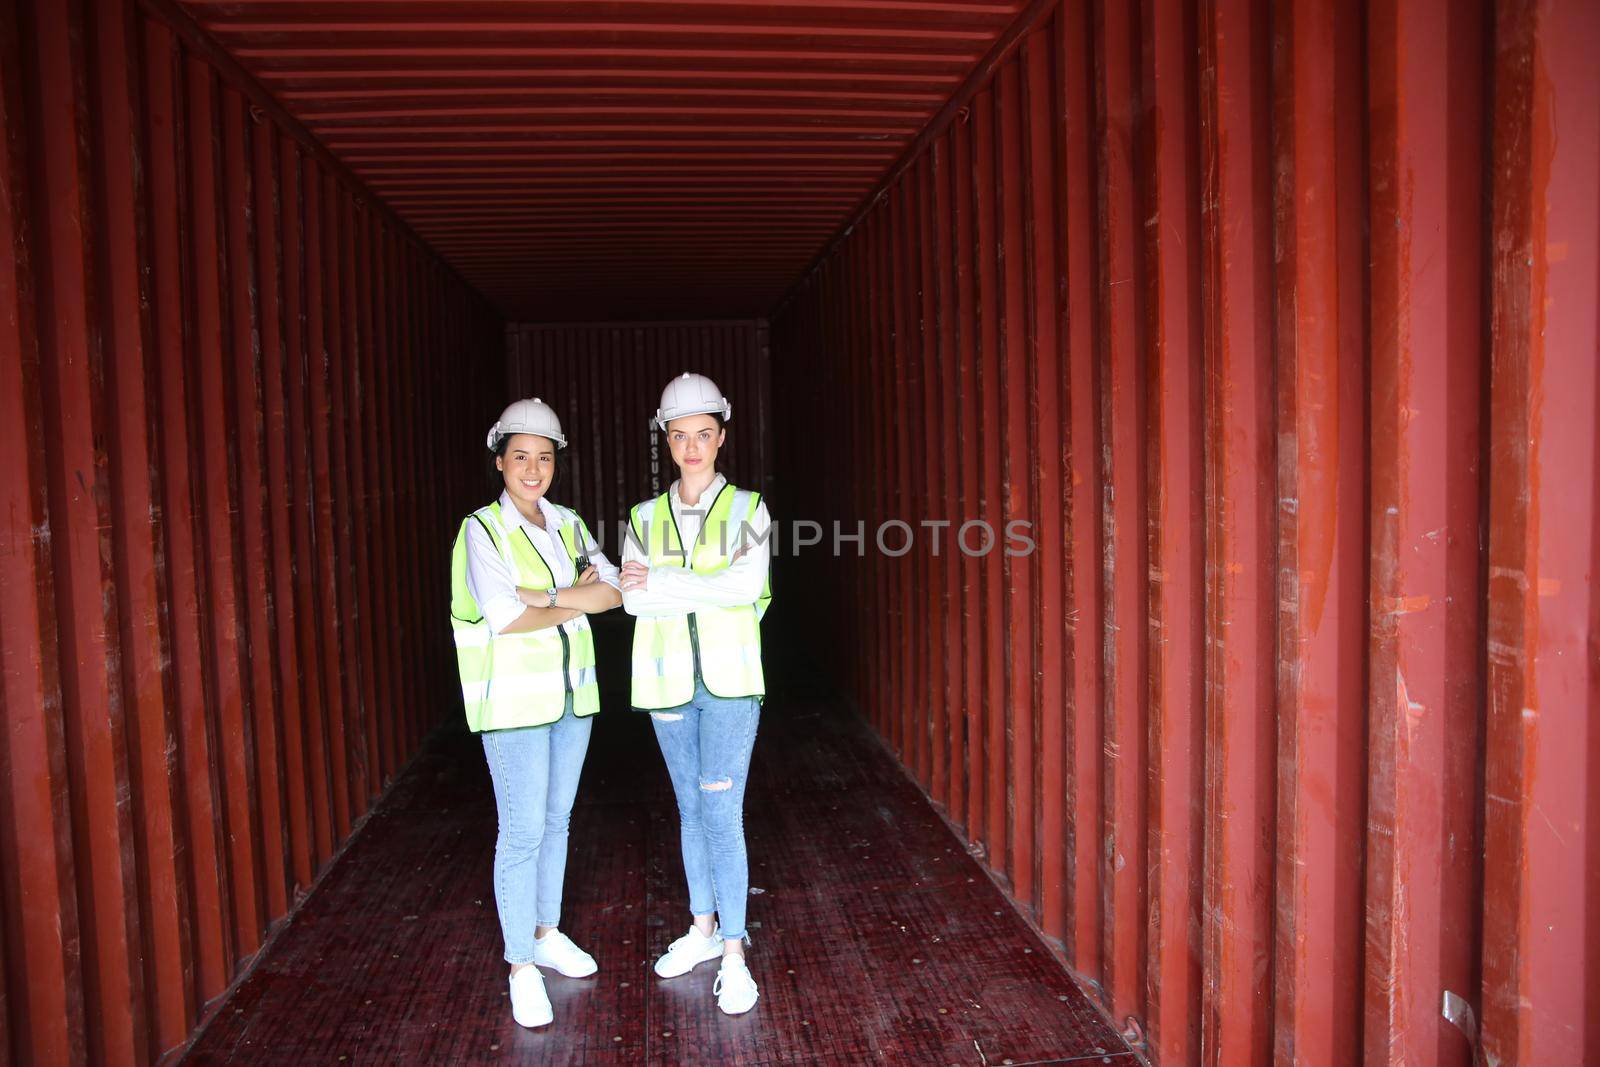 Logistics engineer control at the port, loading containers for trucks export and importing logistic concept